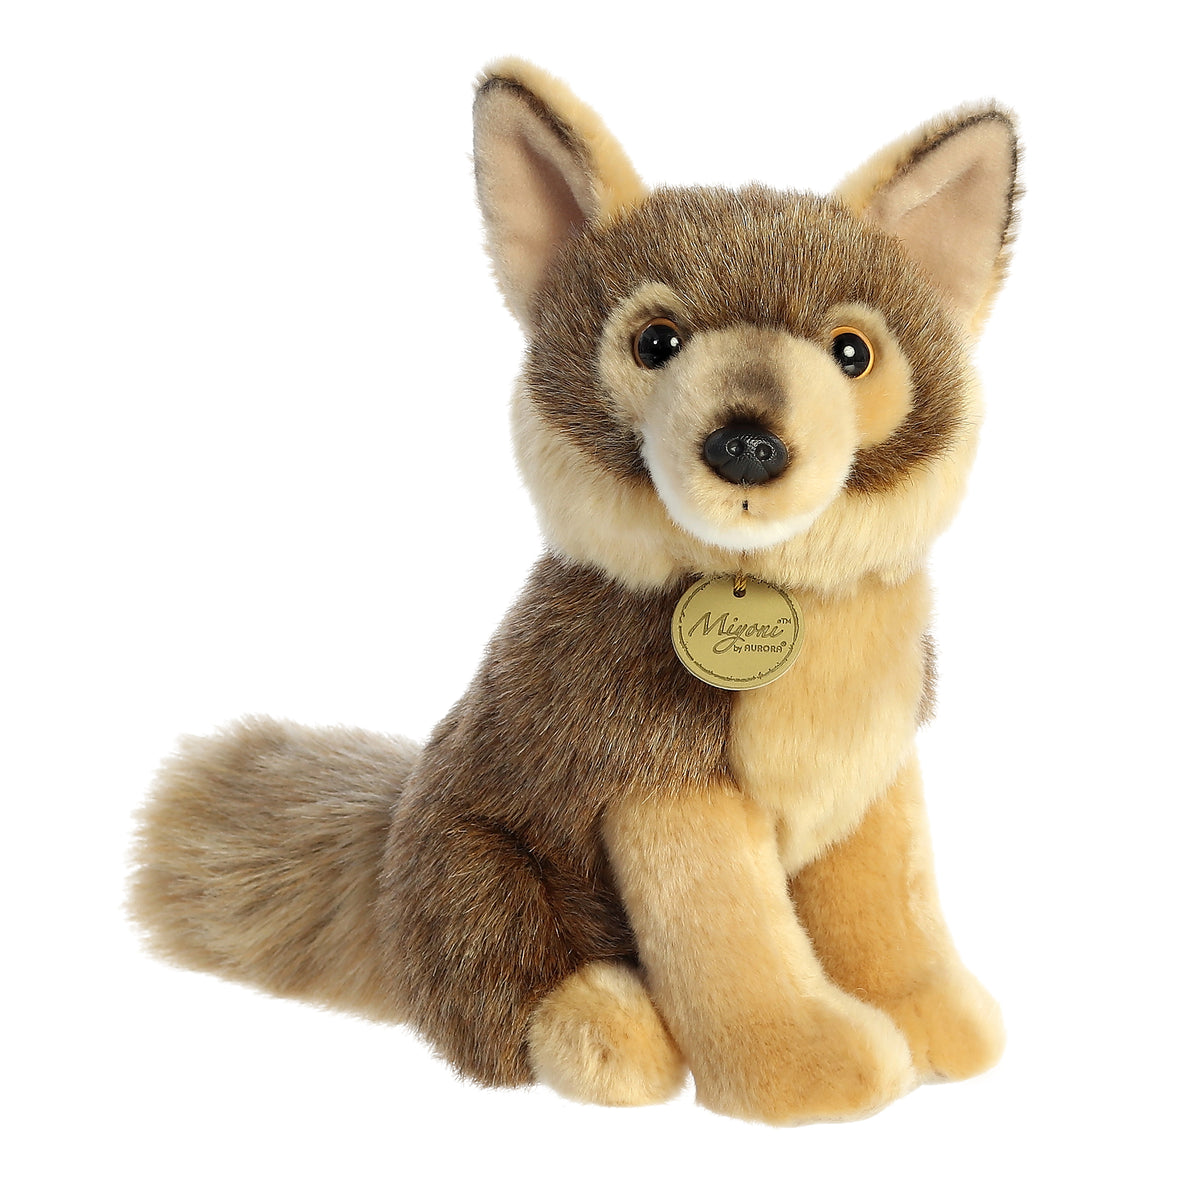 Coyote stuffed animal with a light brown body, dark brown shading, and pointed ears, in the seated position with a hang tag.